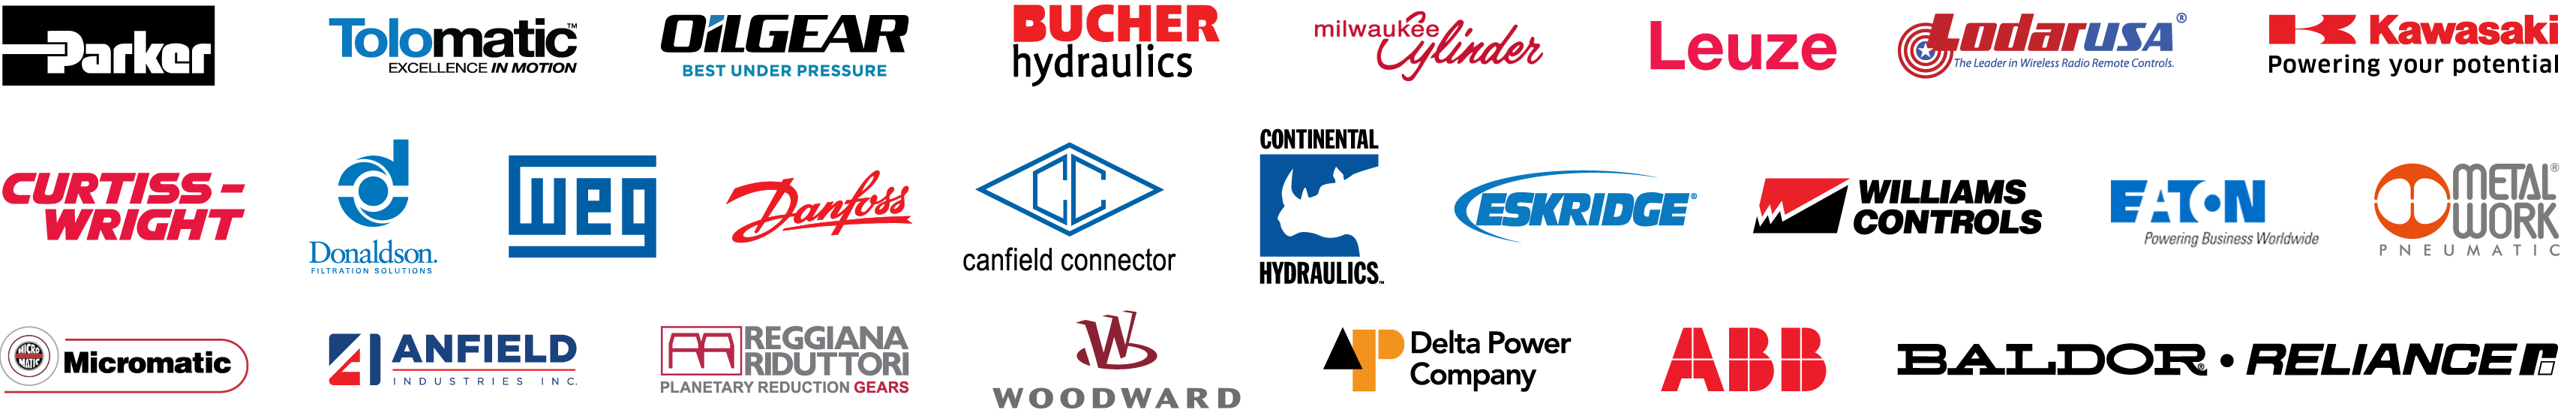 Flow products, hydraulics, and pneumatics in Chicago vendor block